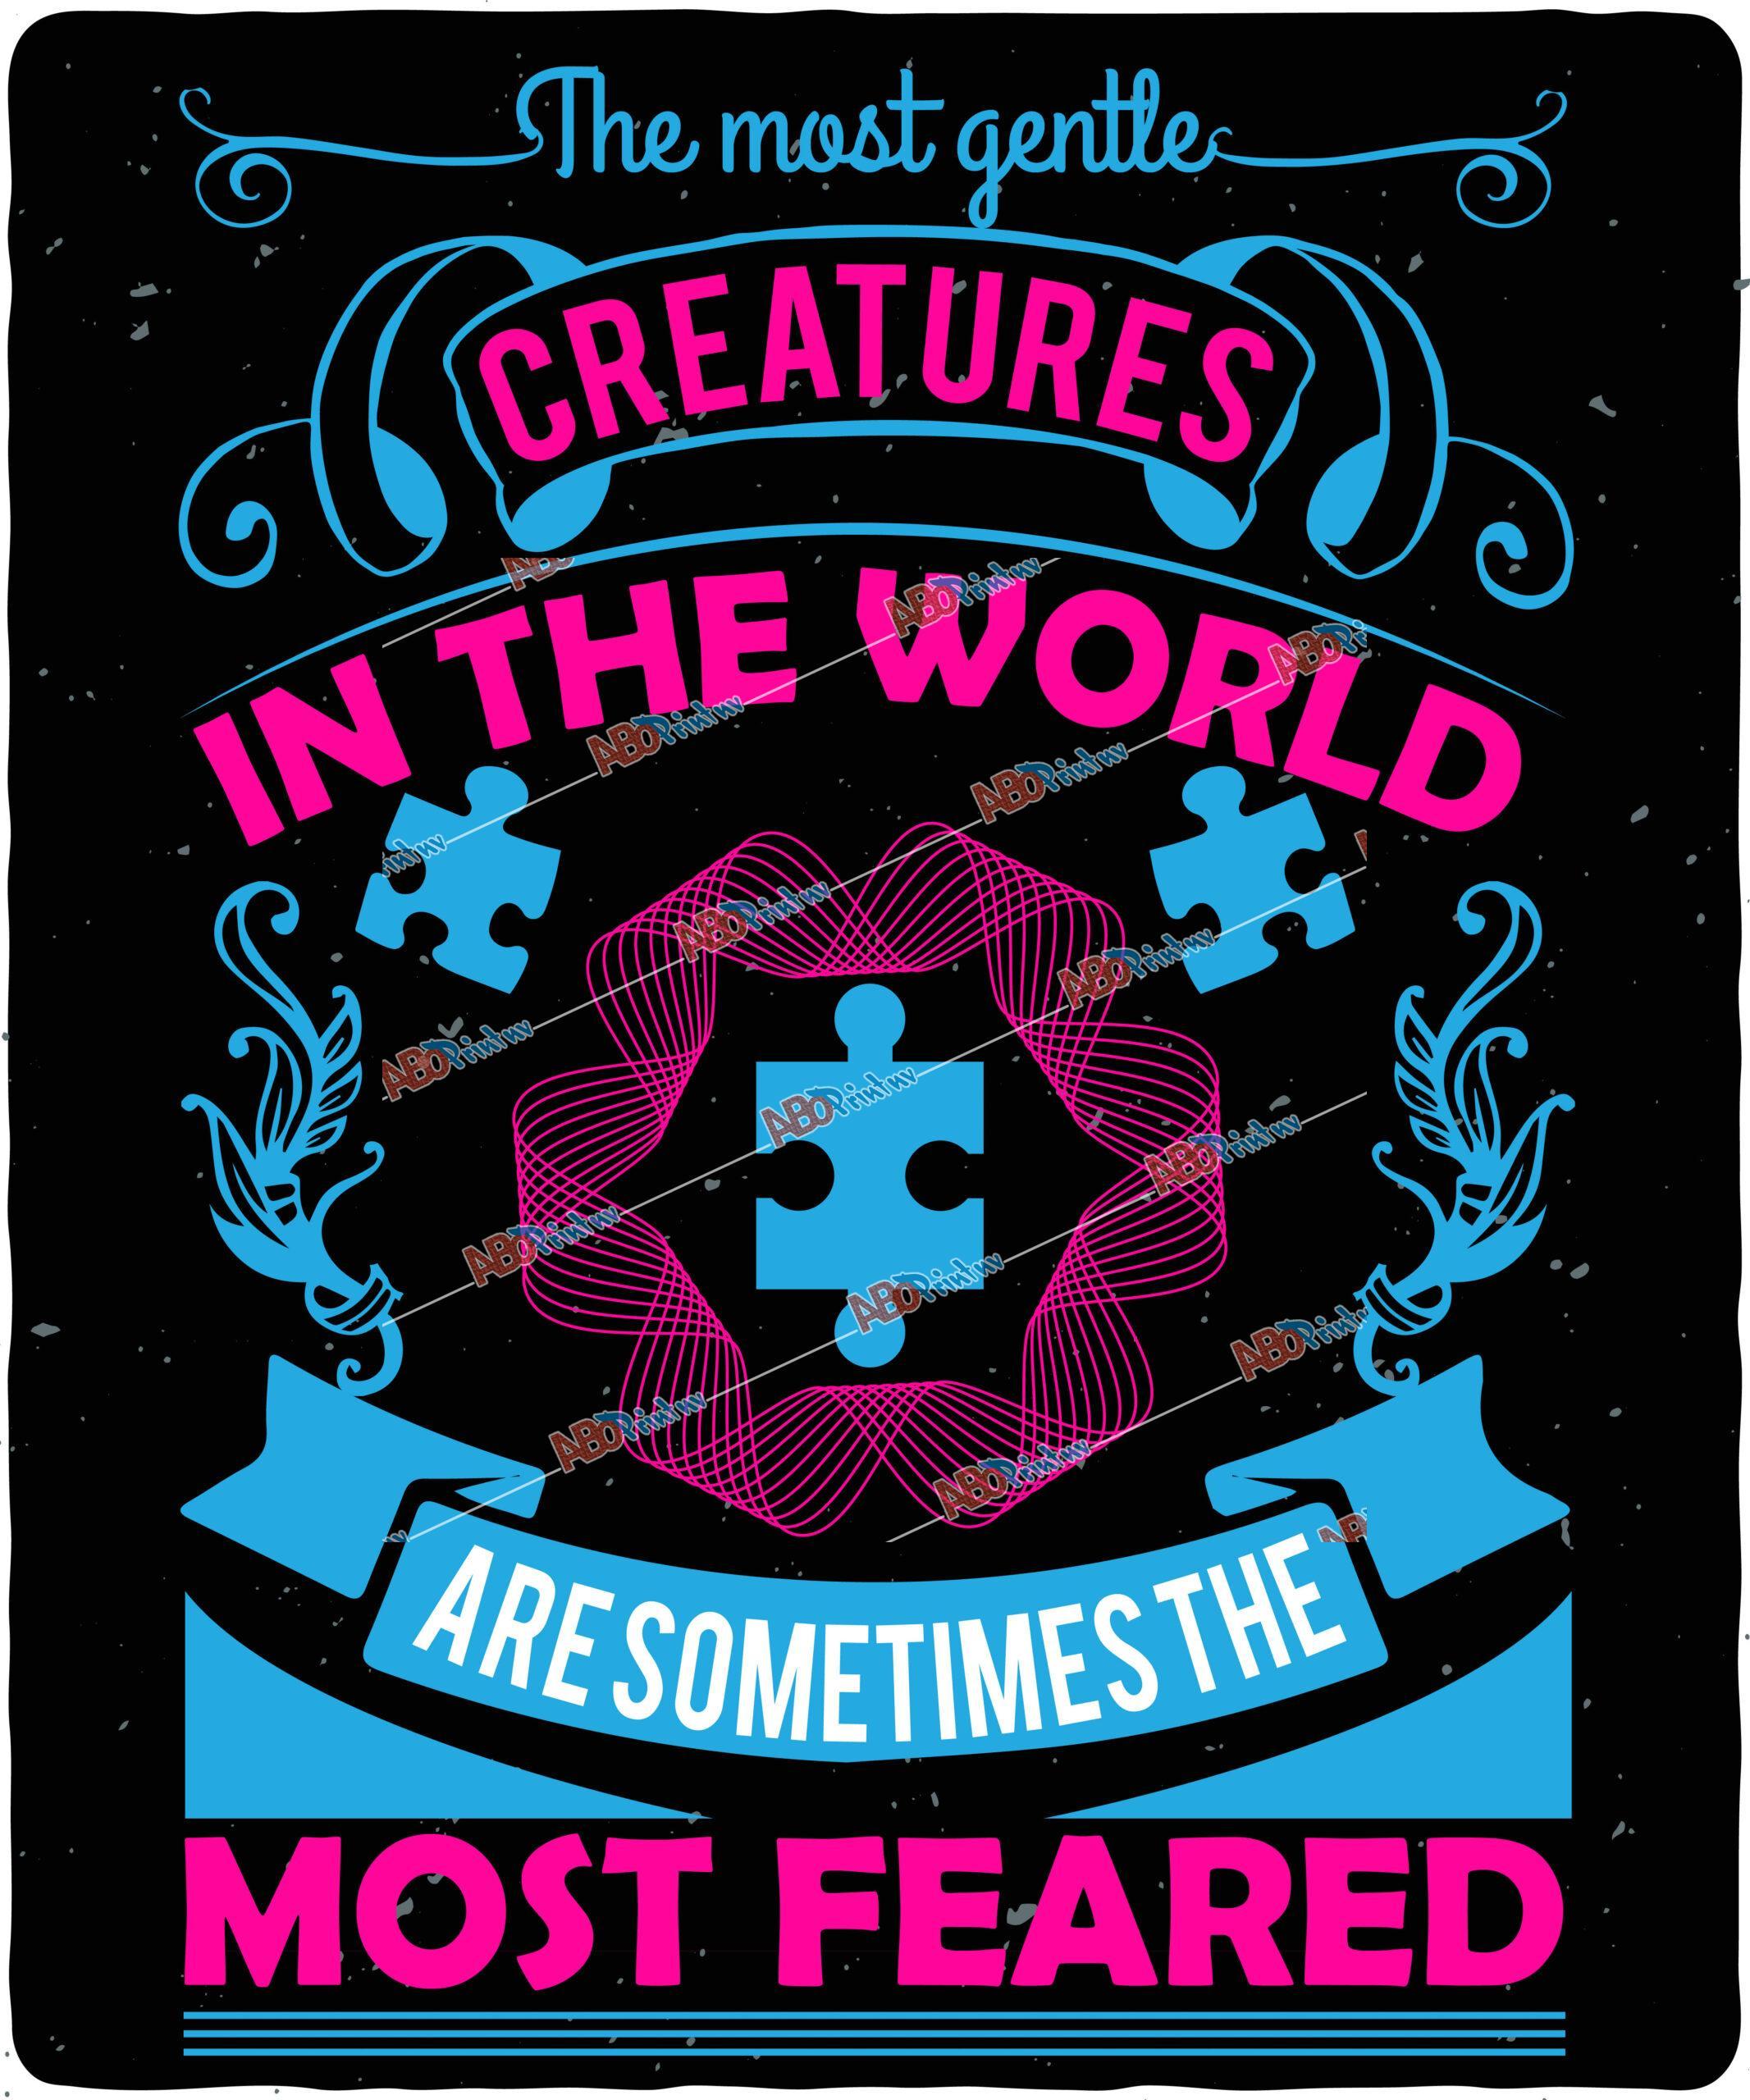 The most gentle creatures in the world, are sometimes the most feared